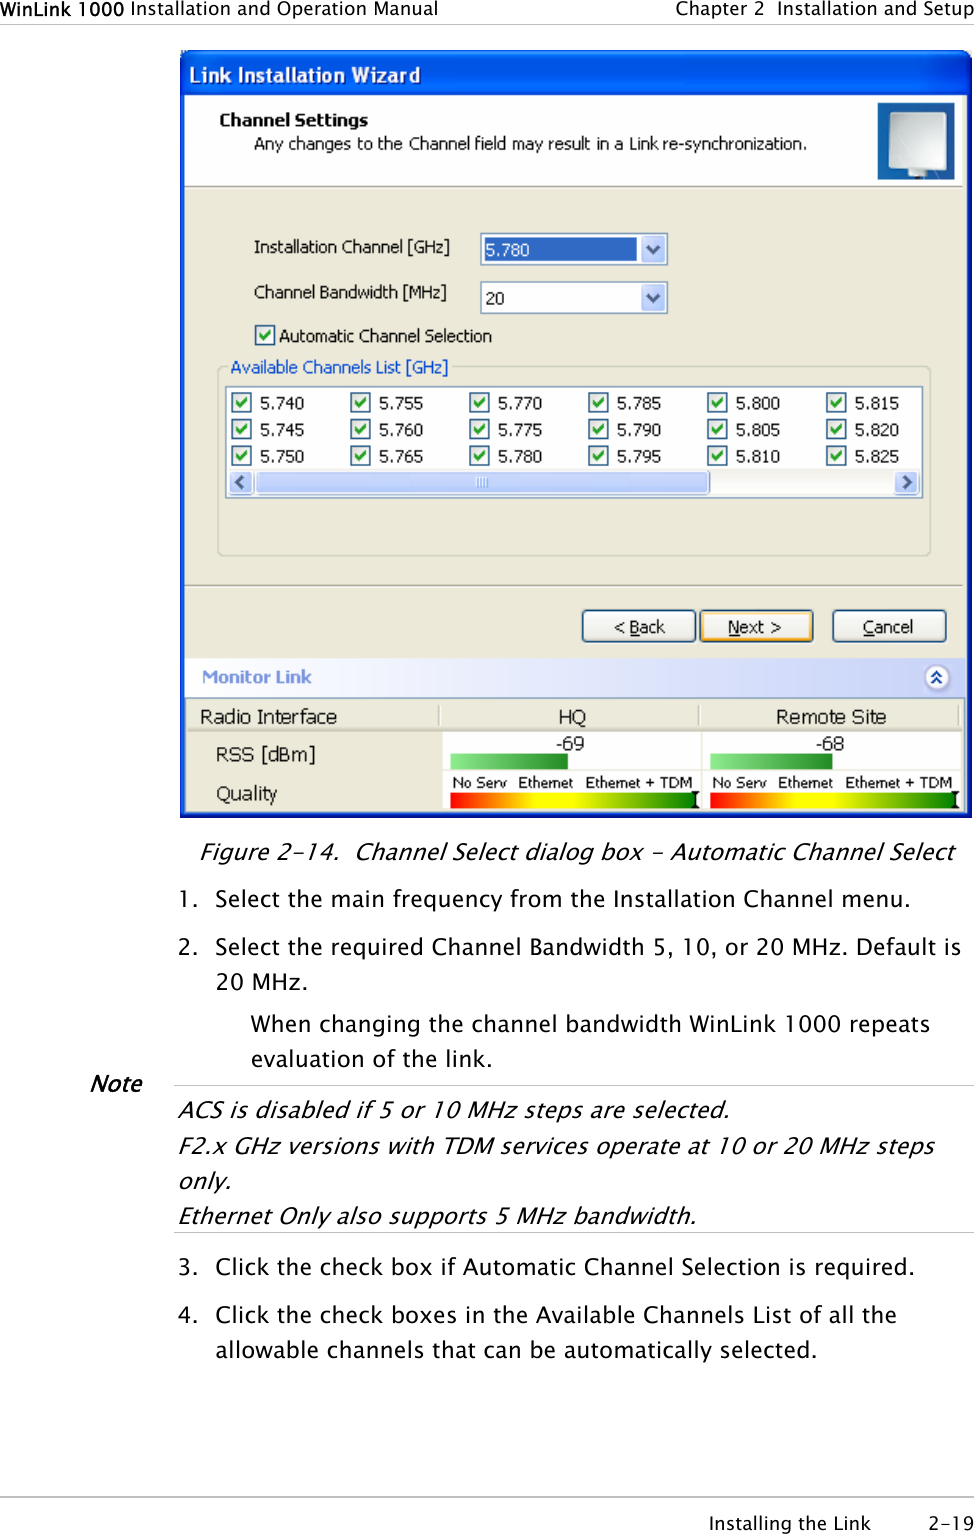 WinLink 1000 Installation and Operation Manual  Chapter  2  Installation and Setup  Figure  2-14.  Channel Select dialog box - Automatic Channel Select 1. Select the main frequency from the Installation Channel menu. 2. Select the required Channel Bandwidth 5, 10, or 20 MHz. Default is 20 MHz. When changing the channel bandwidth WinLink 1000 repeats evaluation of the link.  Note ACS is disabled if 5 or 10 MHz steps are selected. F2.x GHz versions with TDM services operate at 10 or 20 MHz steps only. Ethernet Only also suppor s 5 MHz bandwidth. t 3. Click the check box if Automatic Channel Selection is required. 4. Click the check boxes in the Available Channels List of all the allowable channels that can be automatically selected.  Installing the Link  2-19 